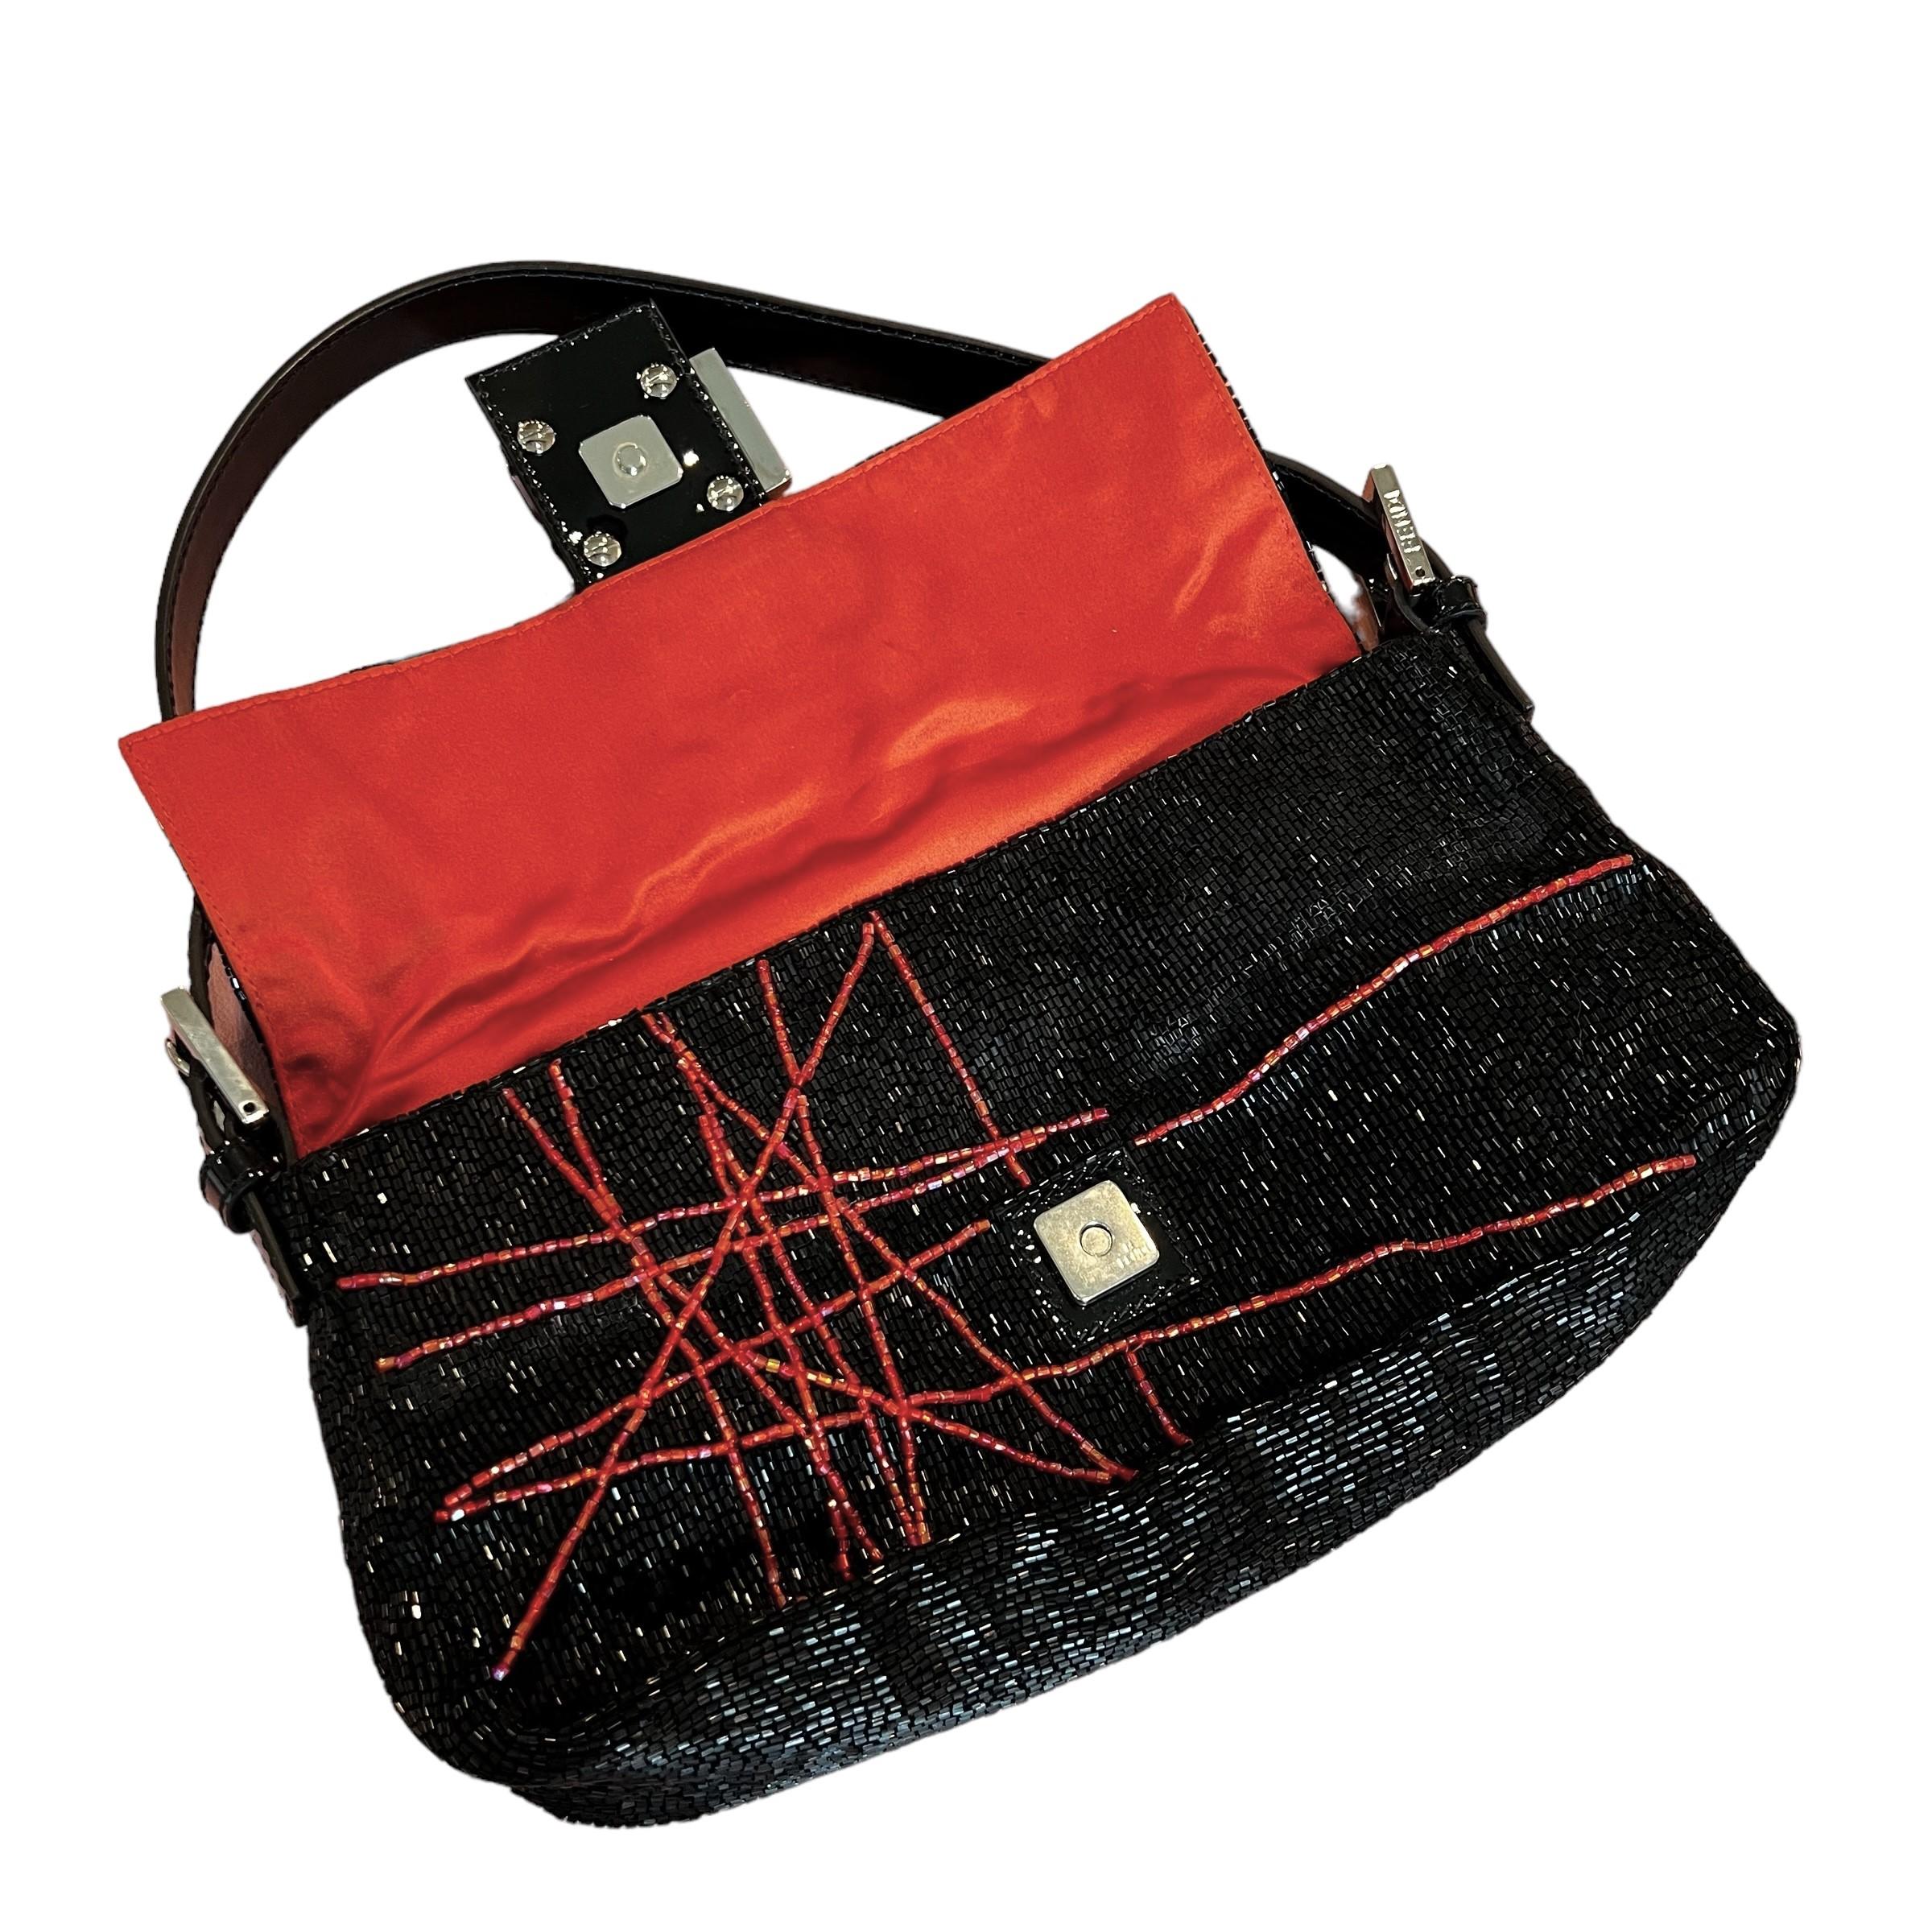 Women's Rare Beaded Fendi Baguette Bag With Patent Leather & Swarovski Crystals For Sale